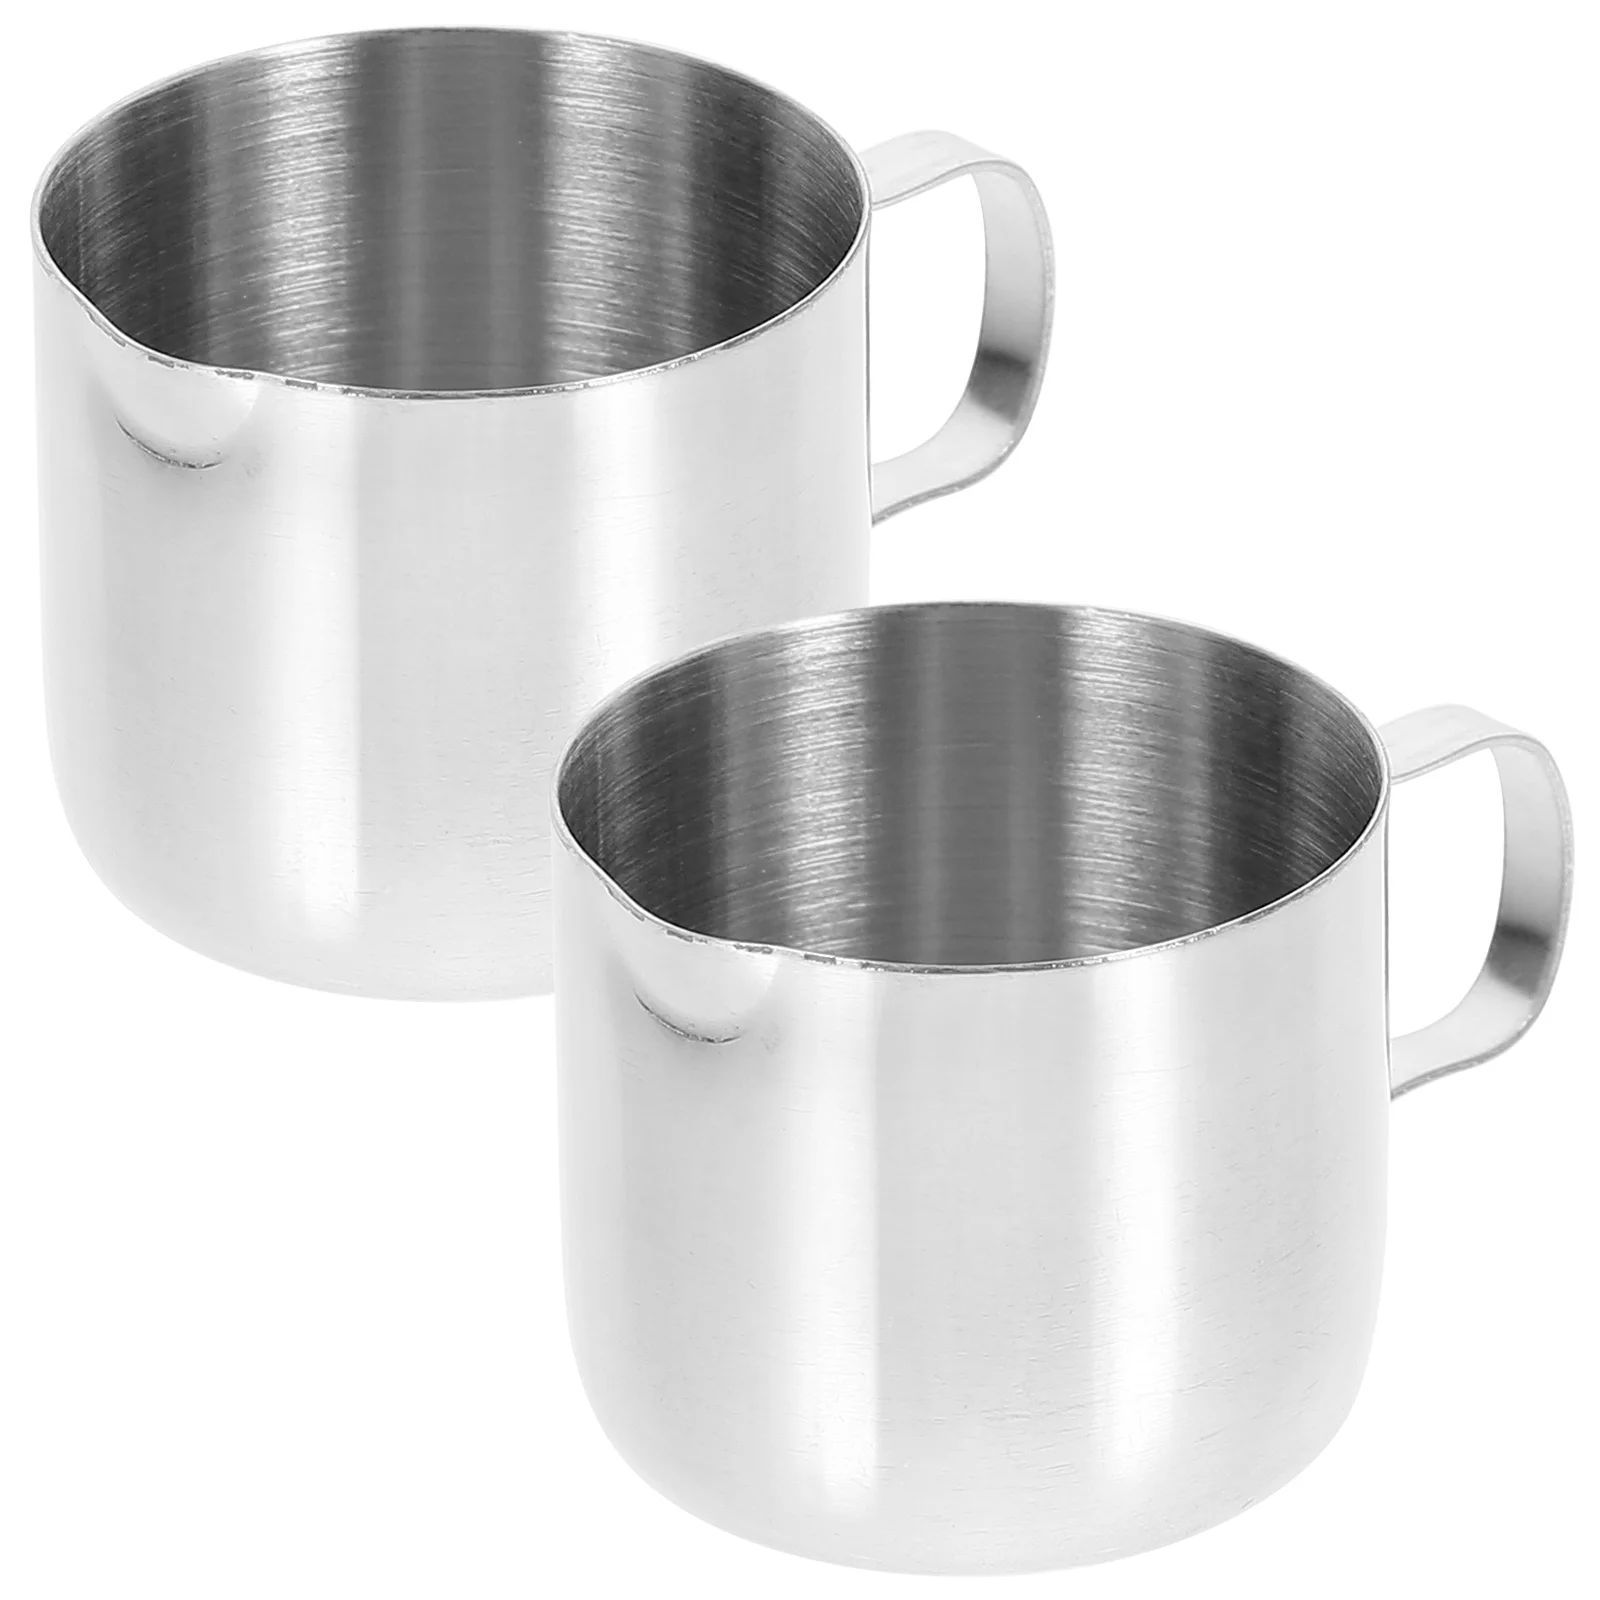 

Milk Pitcher Cup Frothing Creamer Jug Steaming Coffee Steel Stainless Frother Pitchers Espresso Metal Cups Latte Sauce Cream Pot